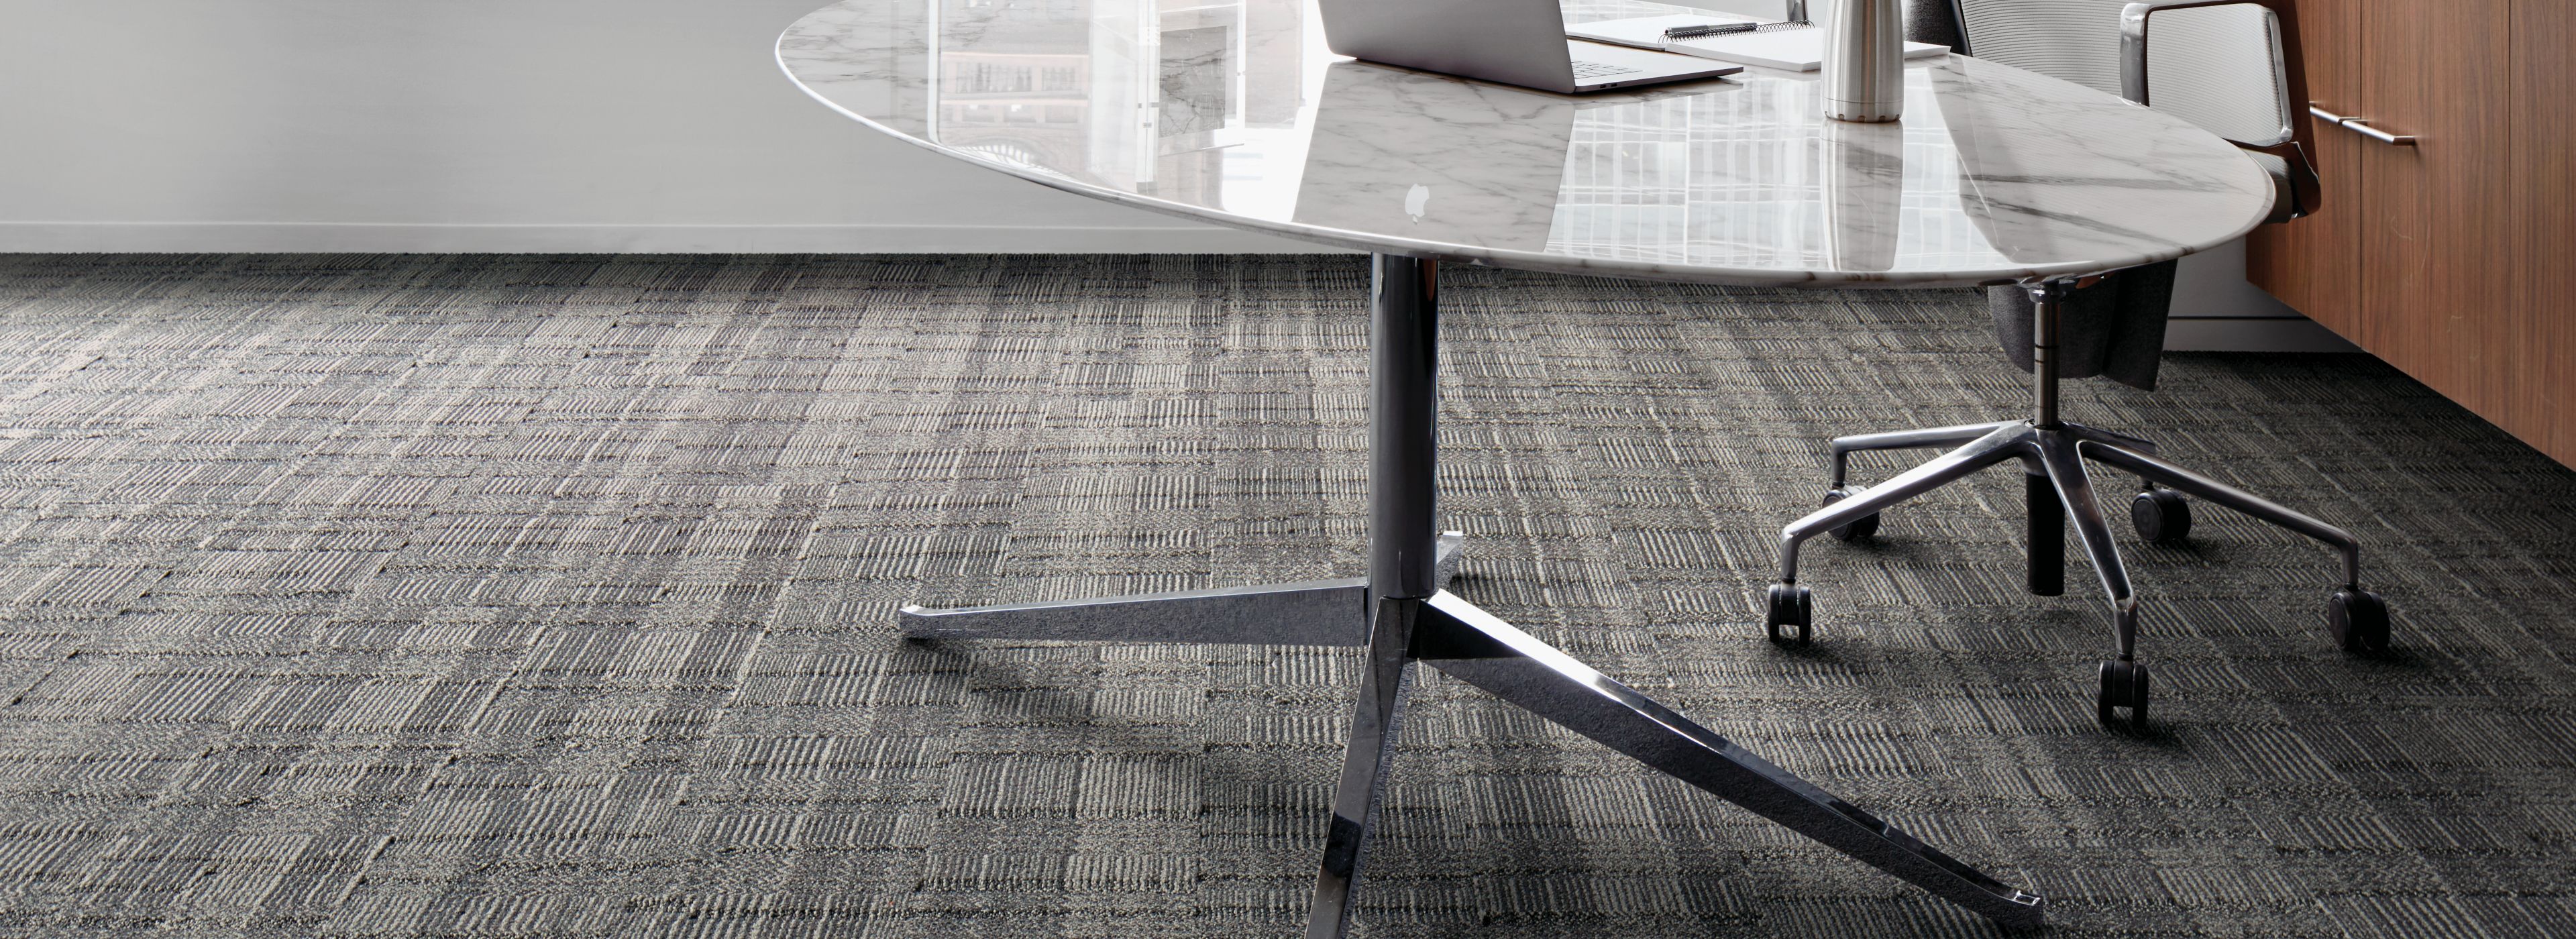 Interface Stitch Count plank carpet tile with table and chair by a window image number 1